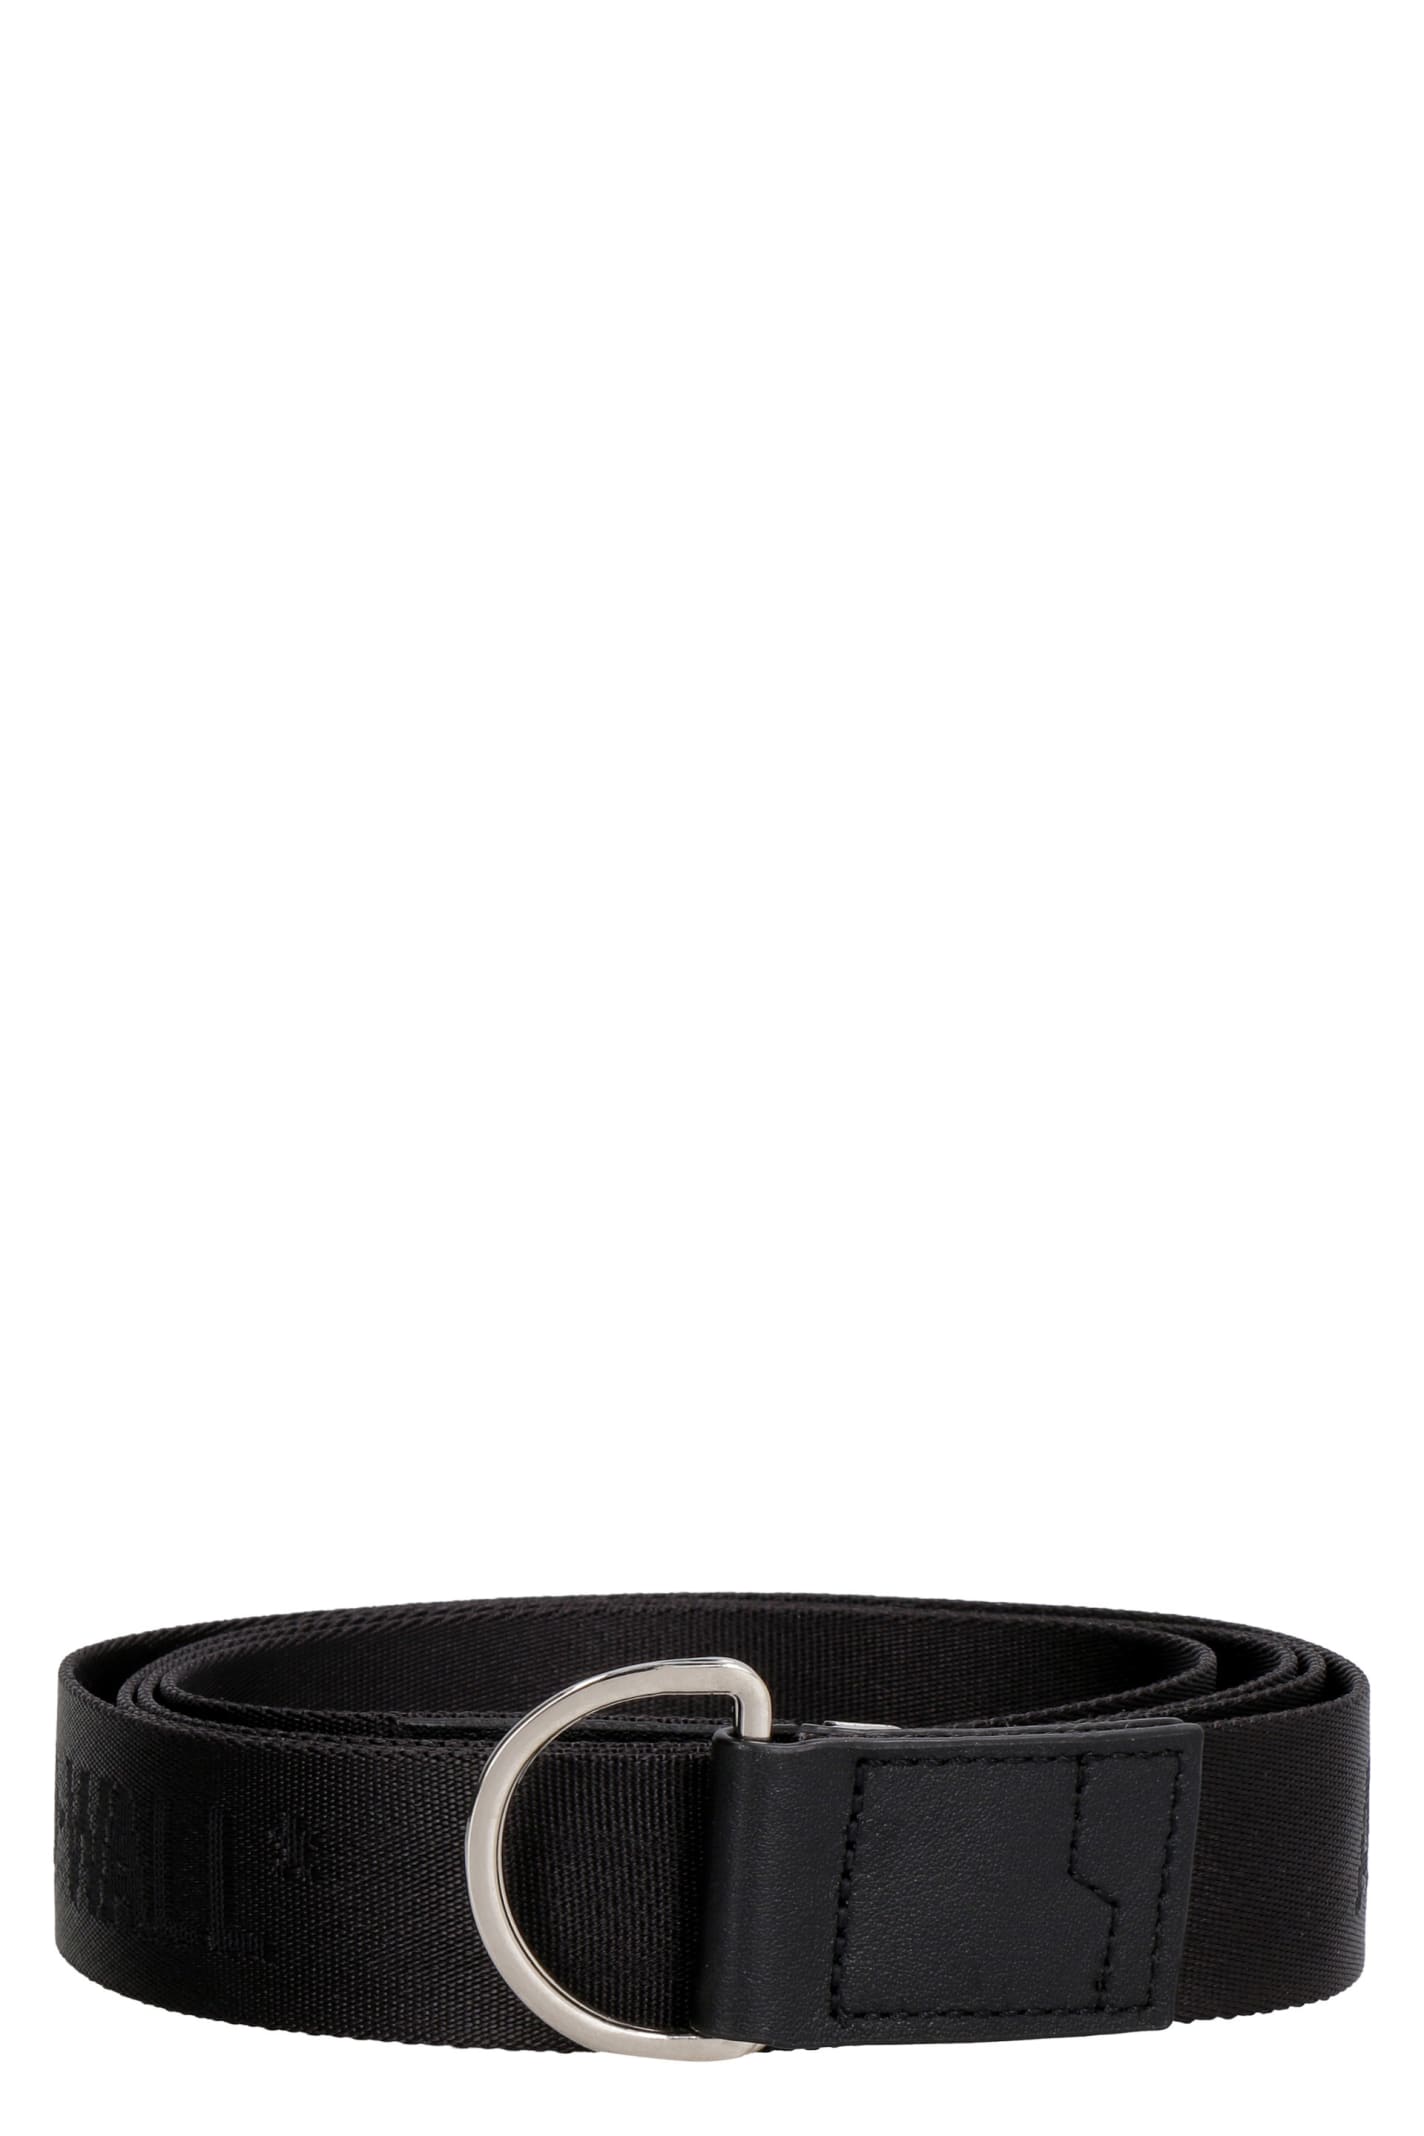 A-COLD-WALL Fabric Belt With Logo